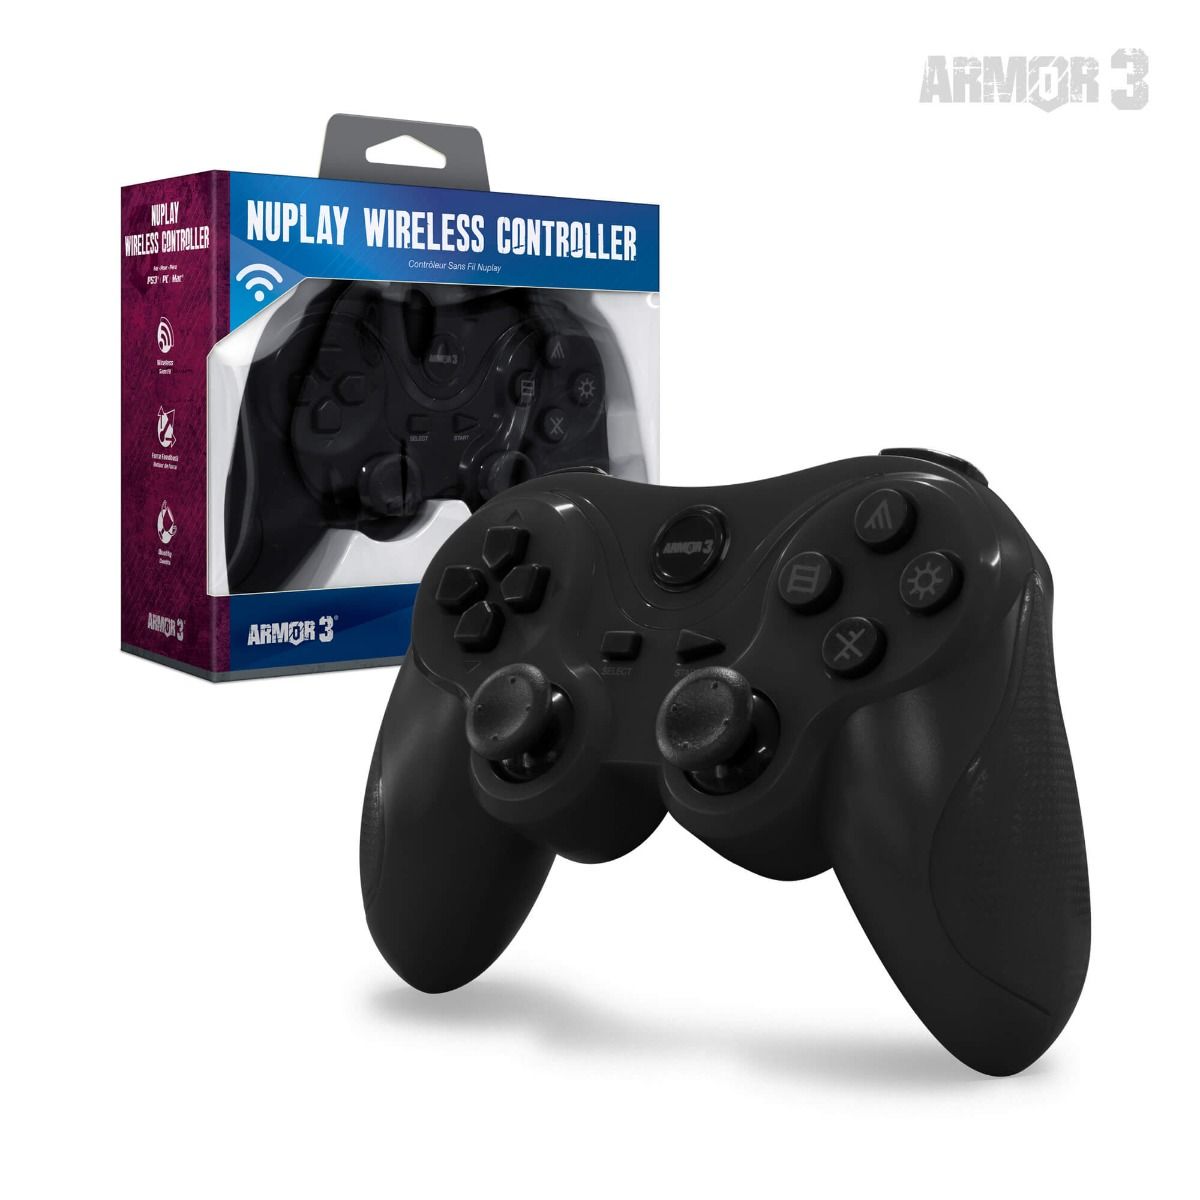 NuPlay PS3® Wireless Game Controller For: PS3®